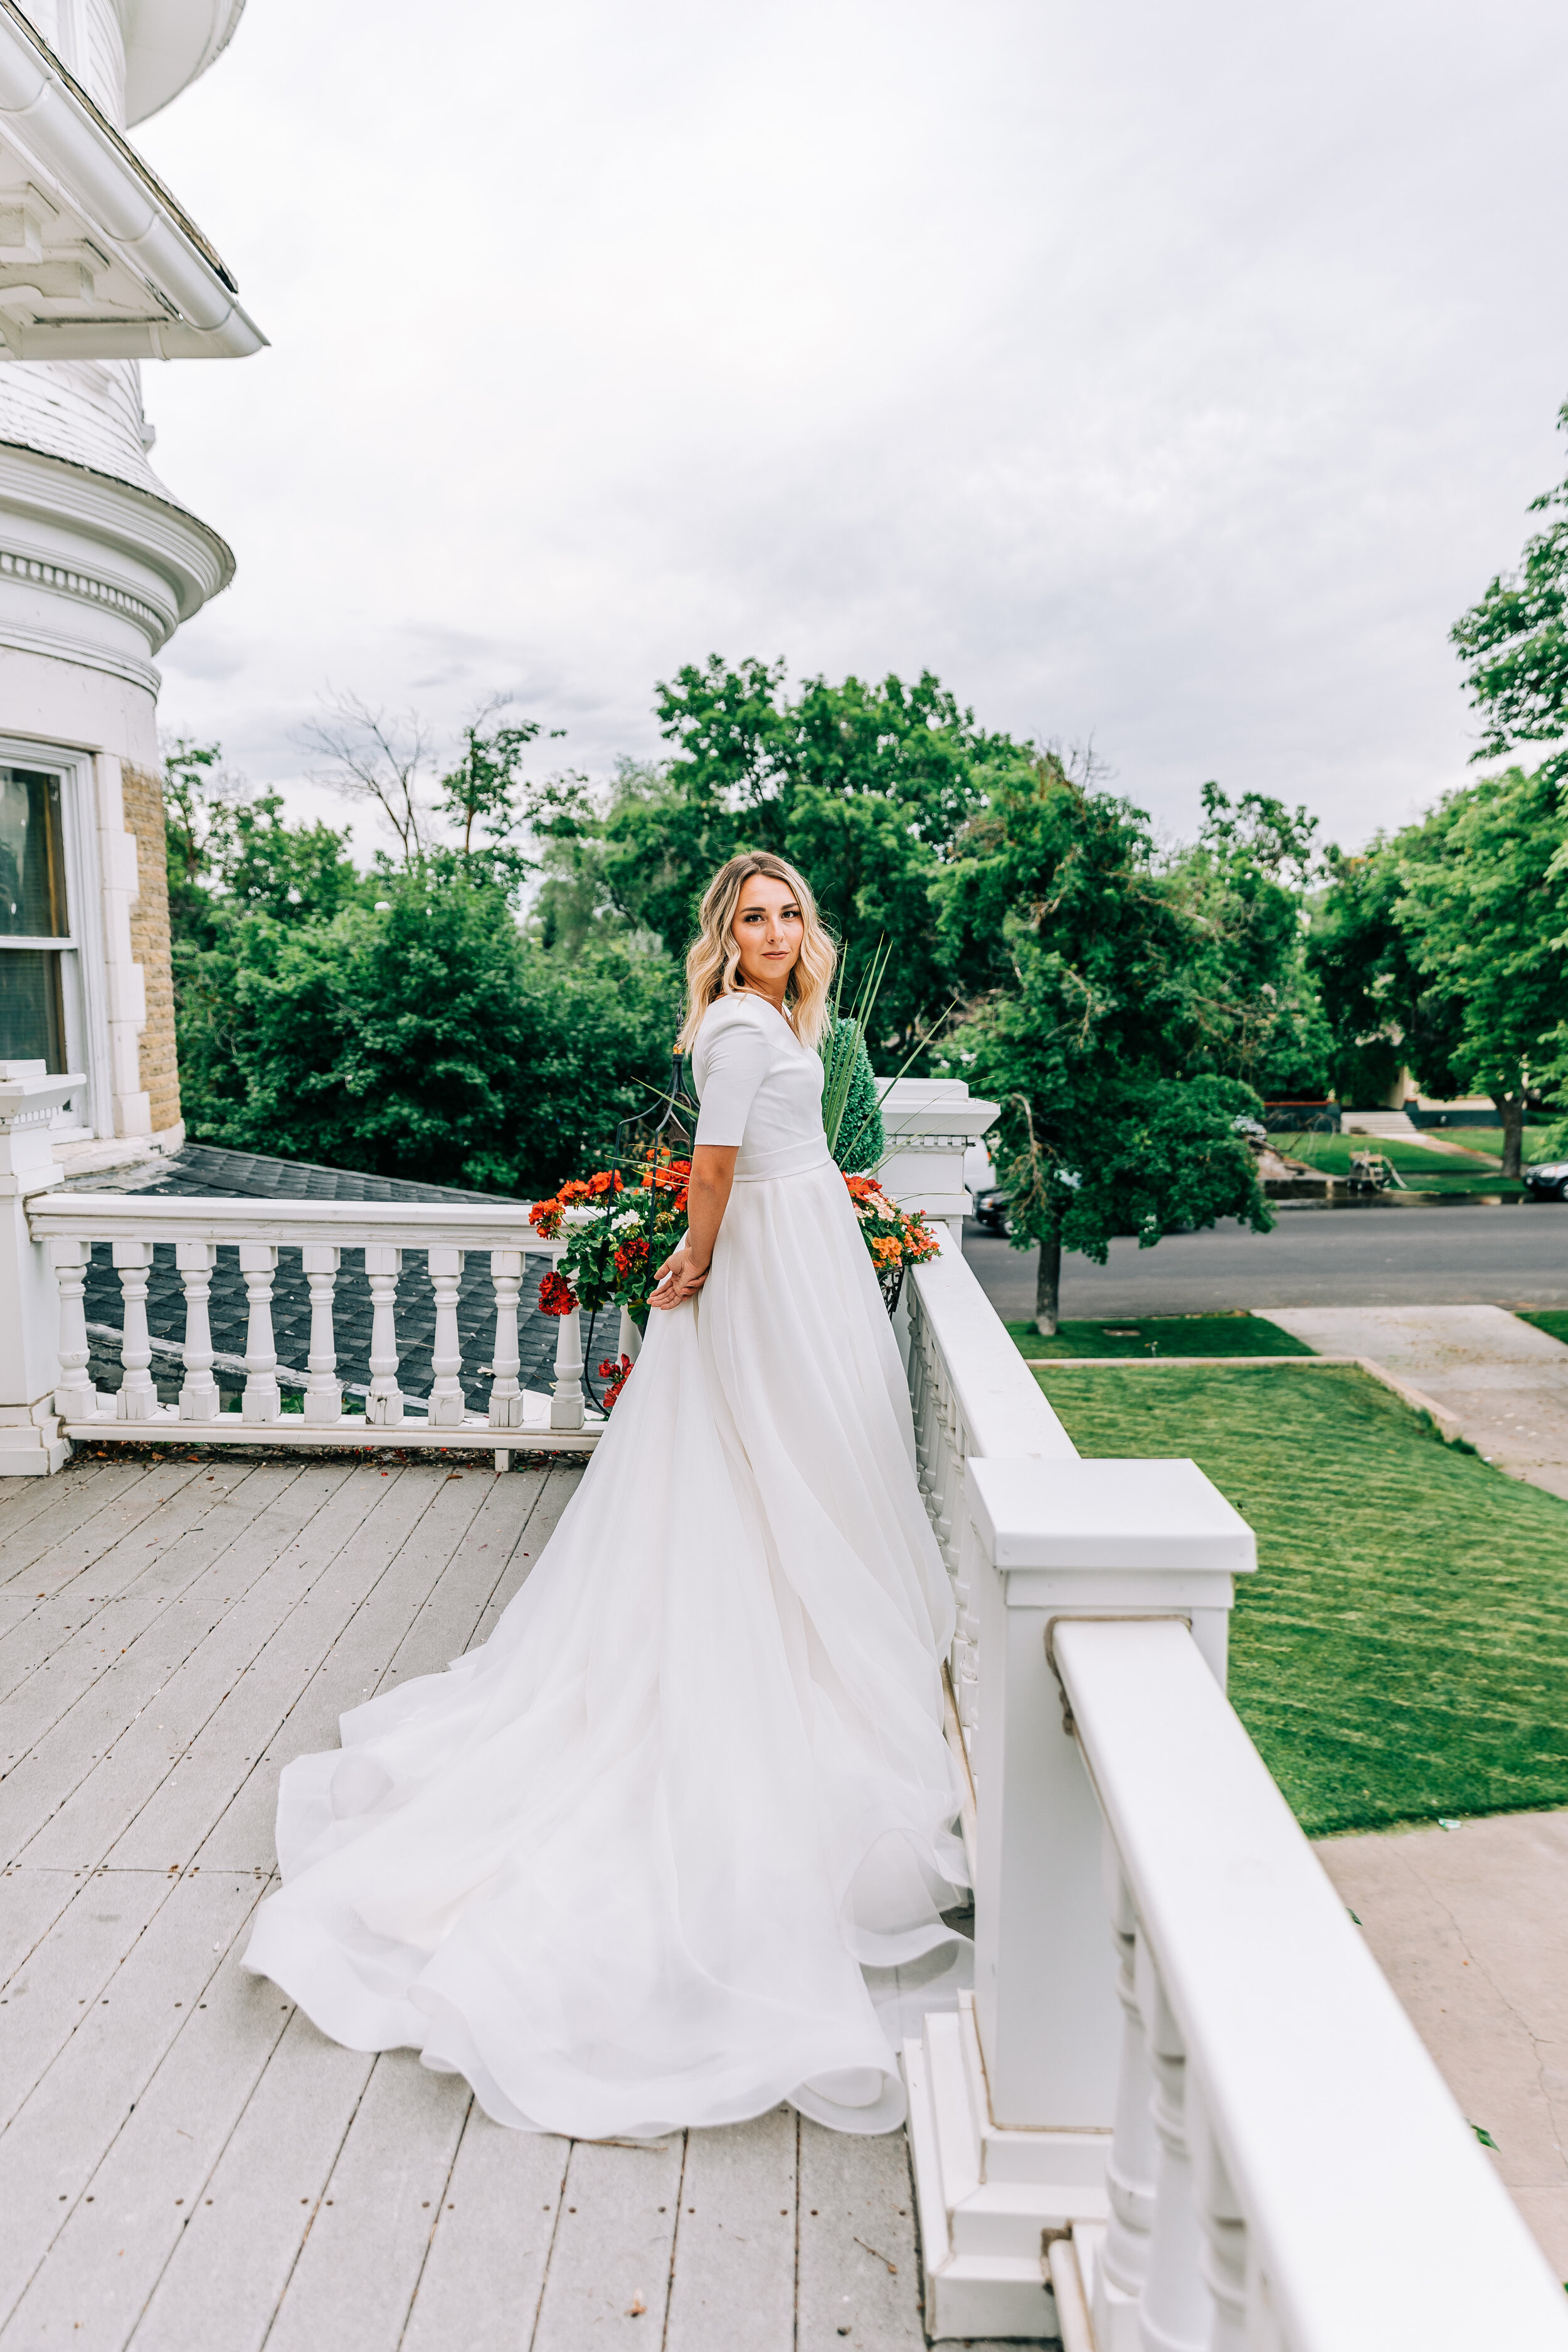  A soft and romantic bridal photo shoot on a Victorian styled porch in beautiful Logan, Utah by Bella Alder Photography. Gorgeous ball gown wedding dress provided by Elizabeth Cooper Design. Wedding inspiration ideas and goals Logan, Utah photography